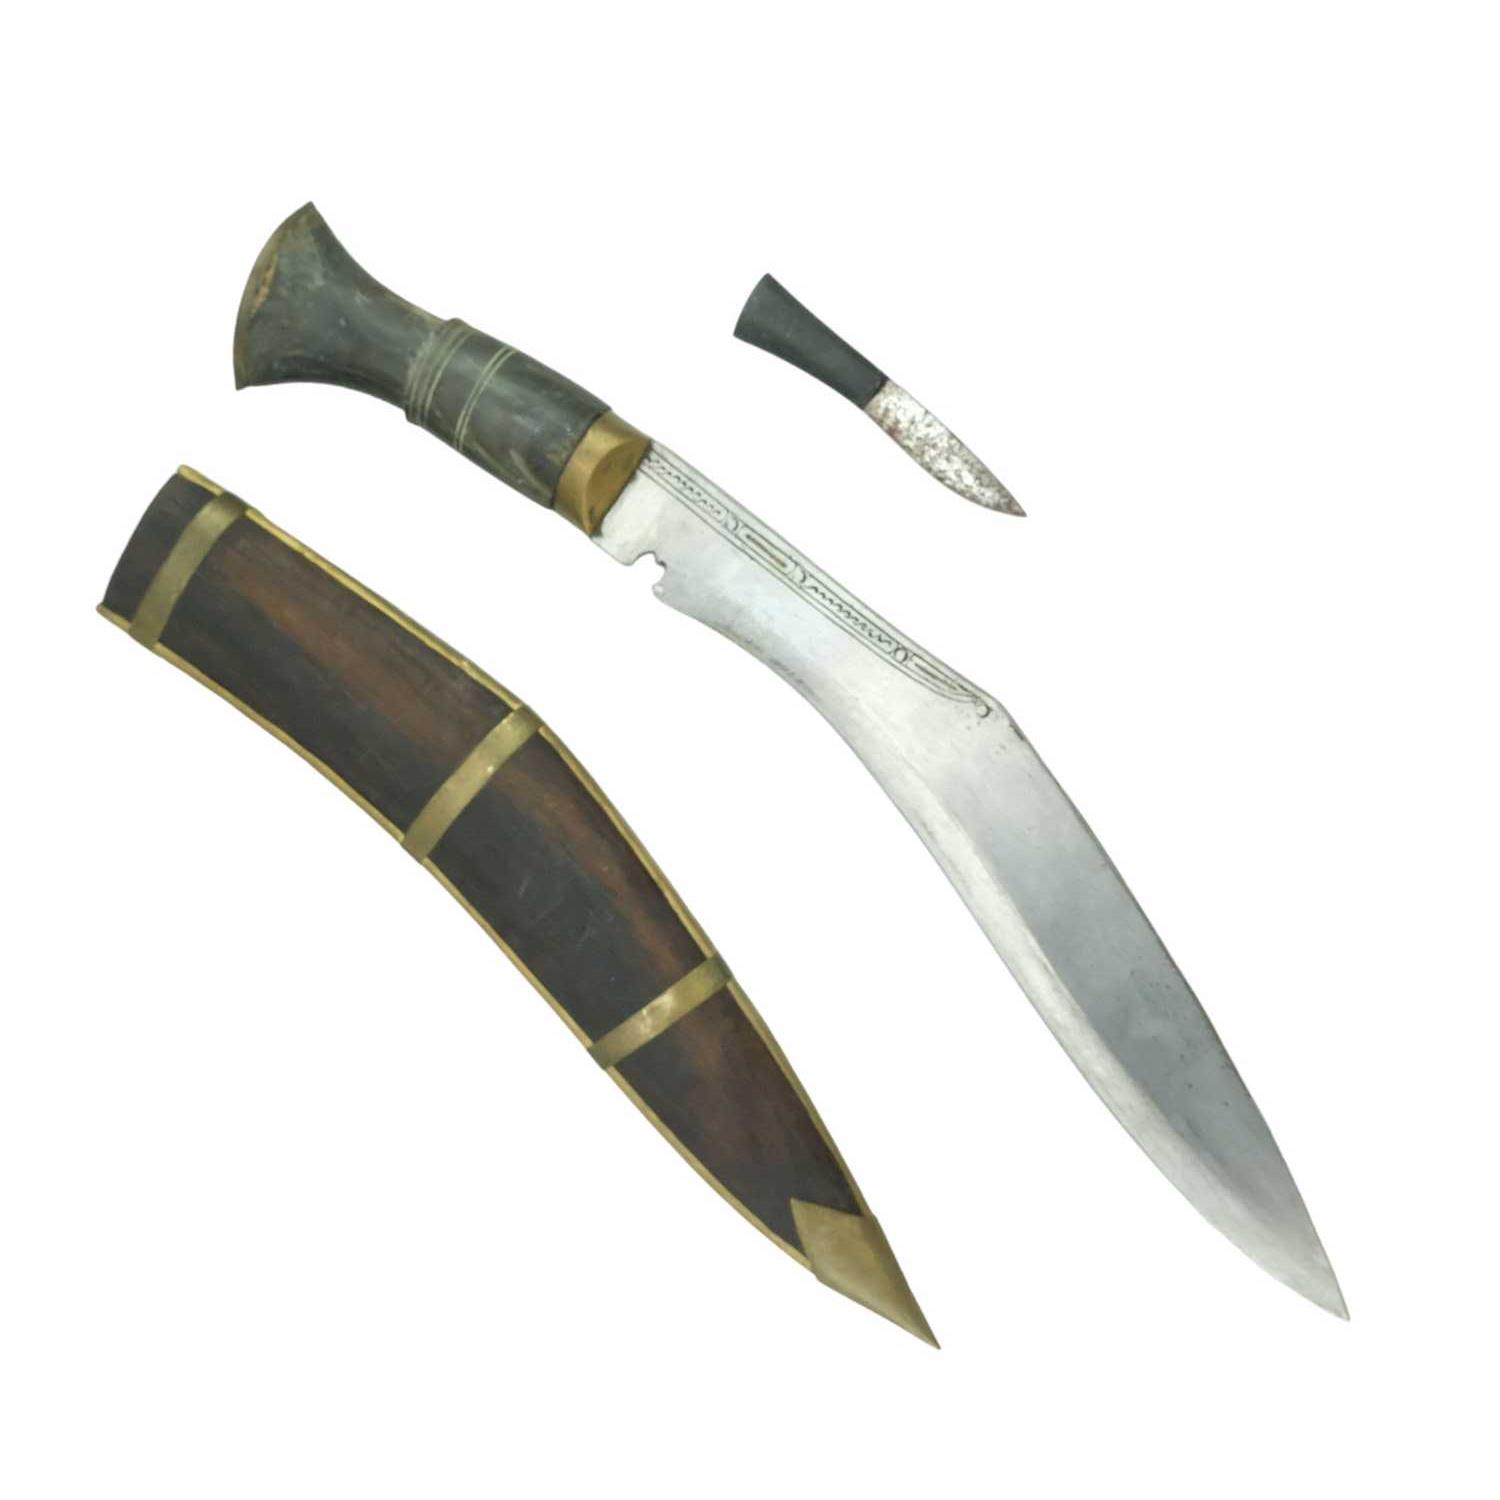 An Indian / Nepalese kukri in brass-mounted wooden scabbard, 42 cm